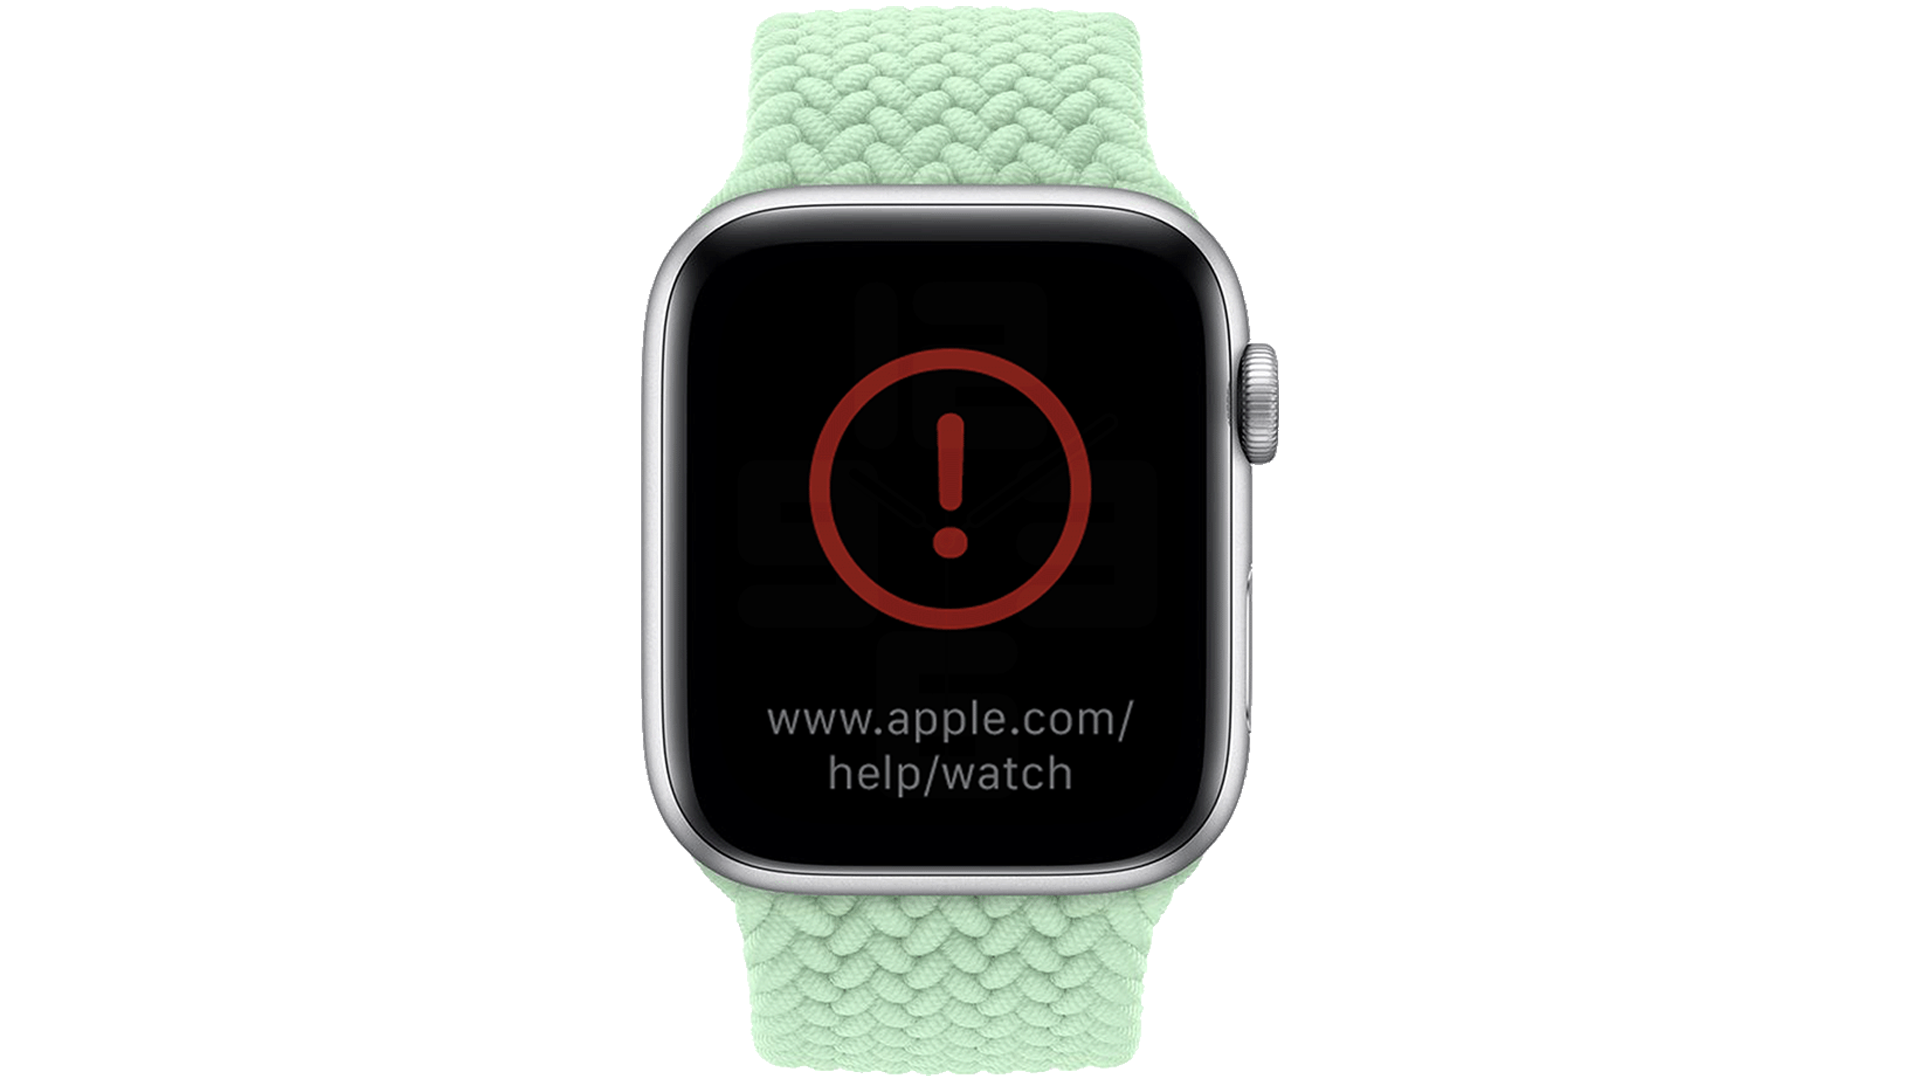 iOS 15.4 update saves you going to an Apple Store to restore your Watch